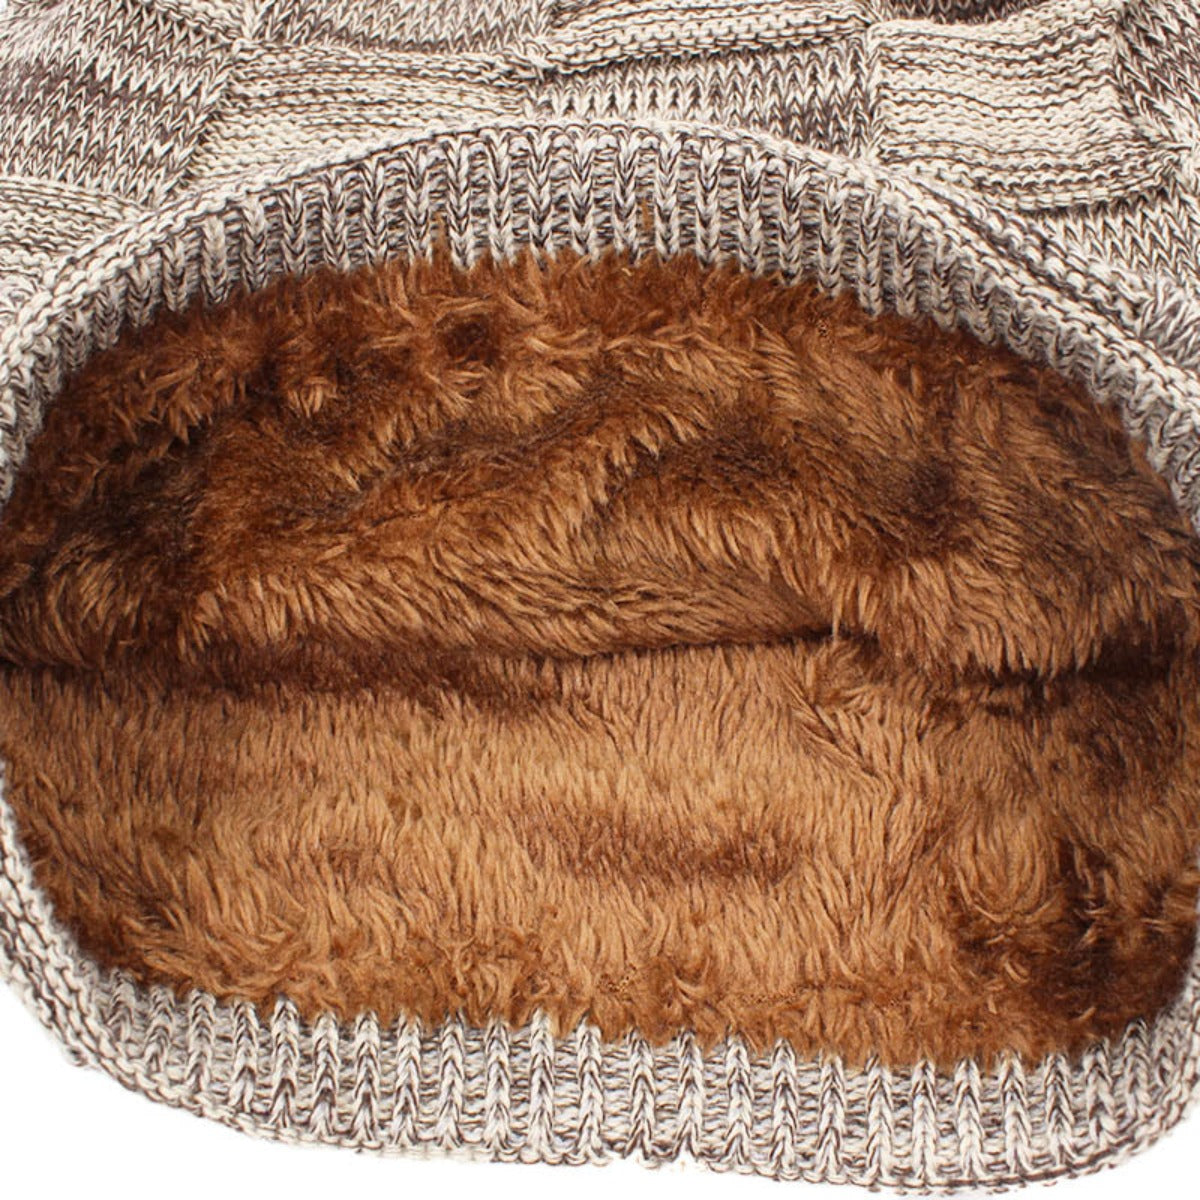 A high-quality Casual Winter Knitted Beanie Hat, perfect for winter, with a fur lining.